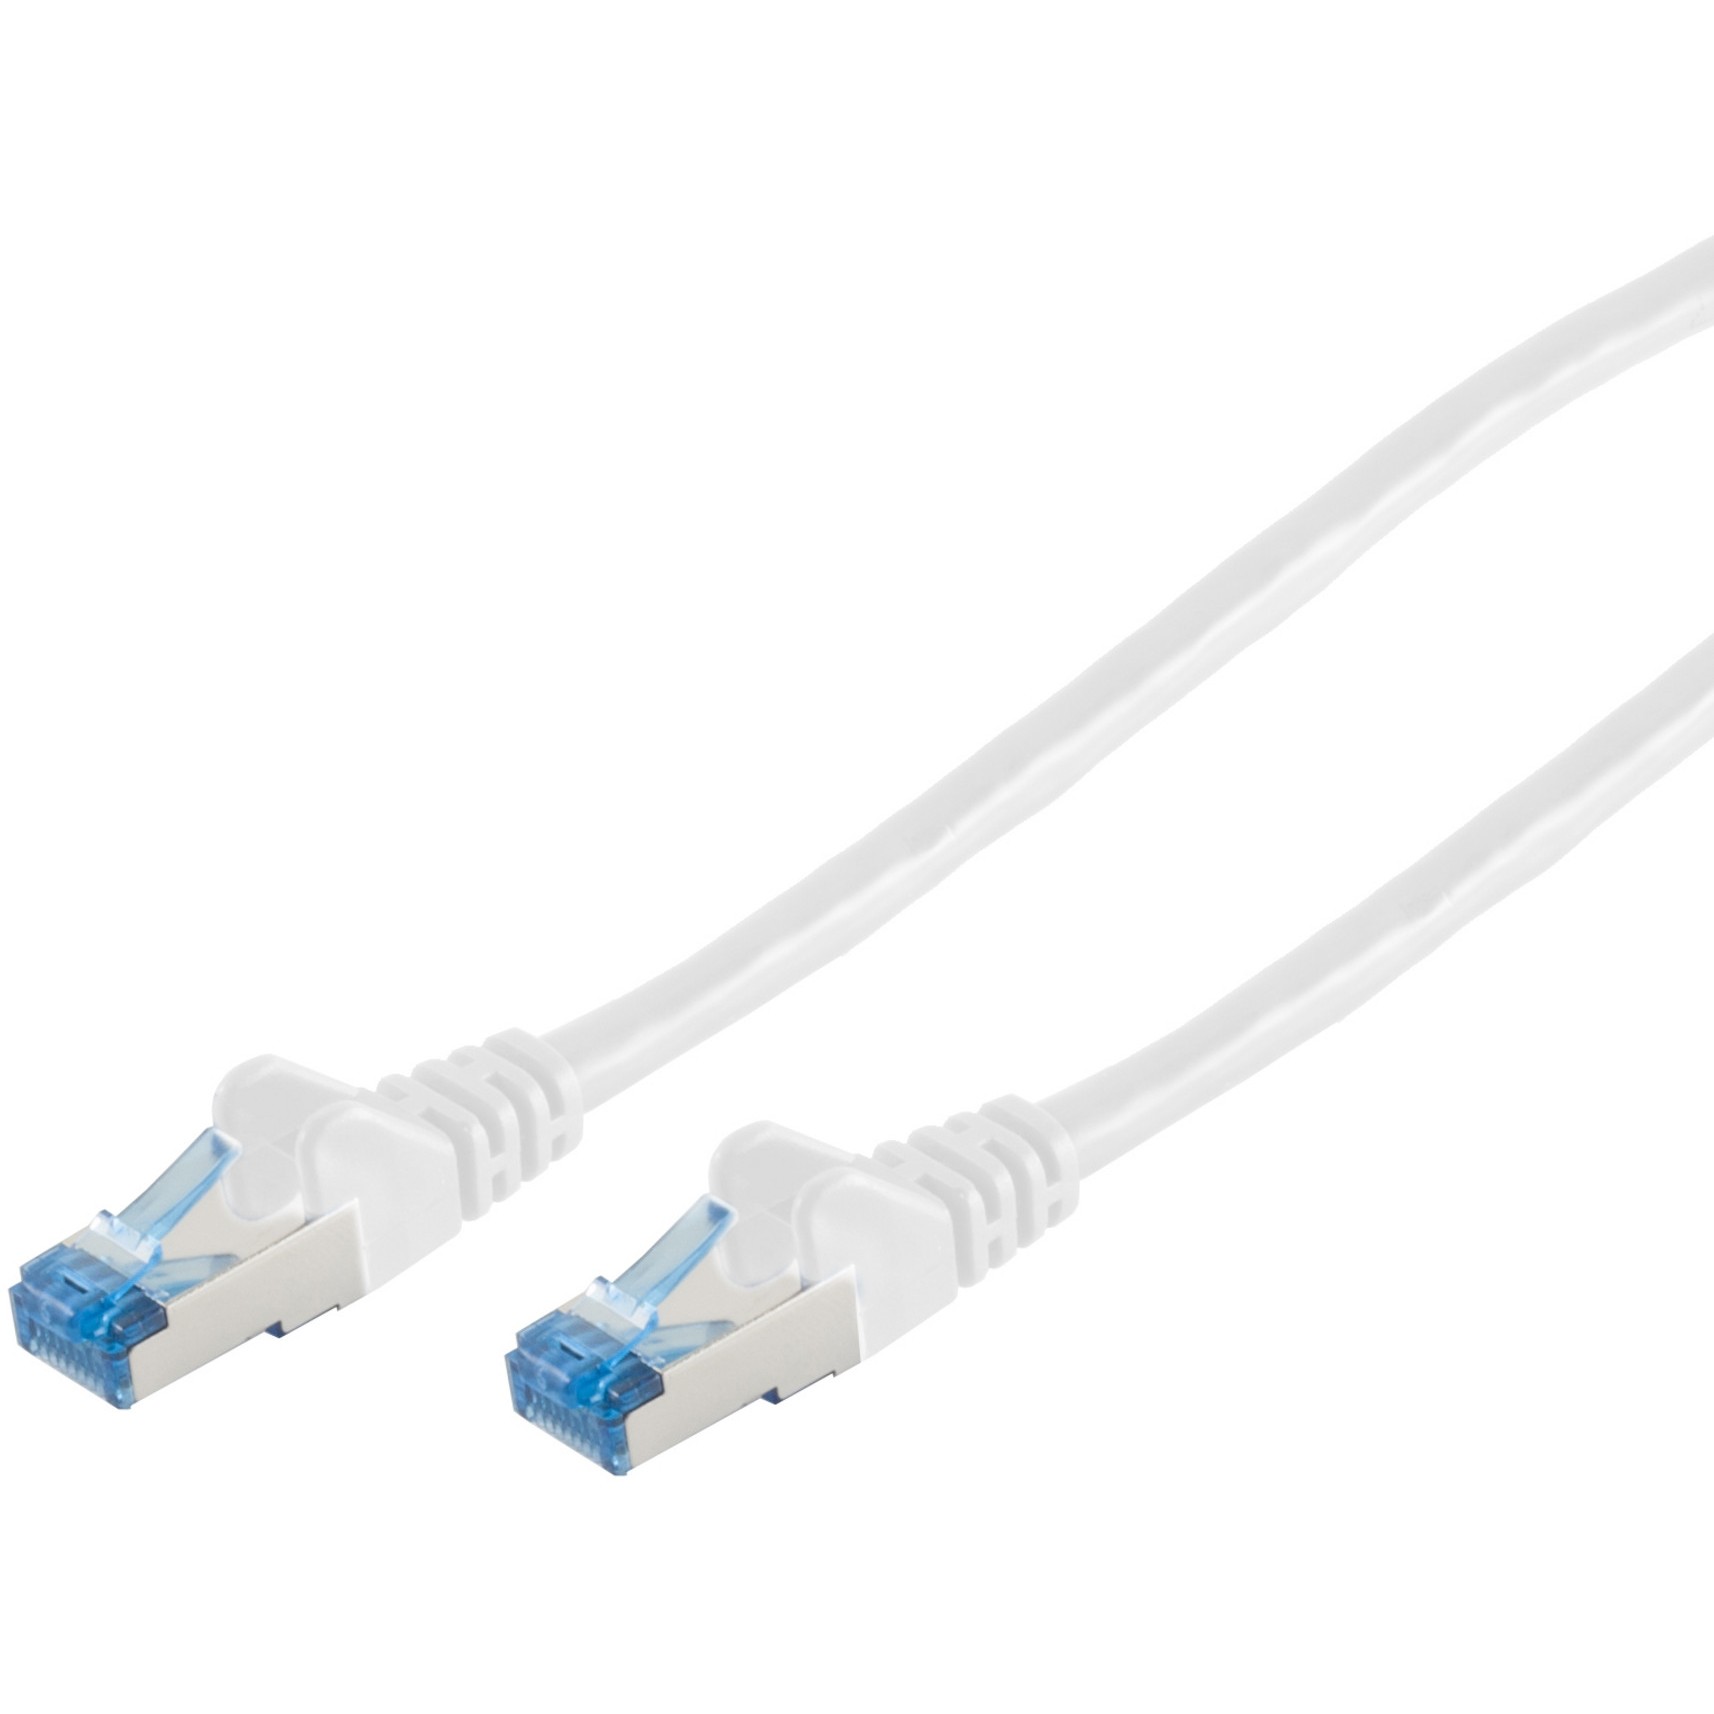 S-Conn 75711-0.5W networking cable